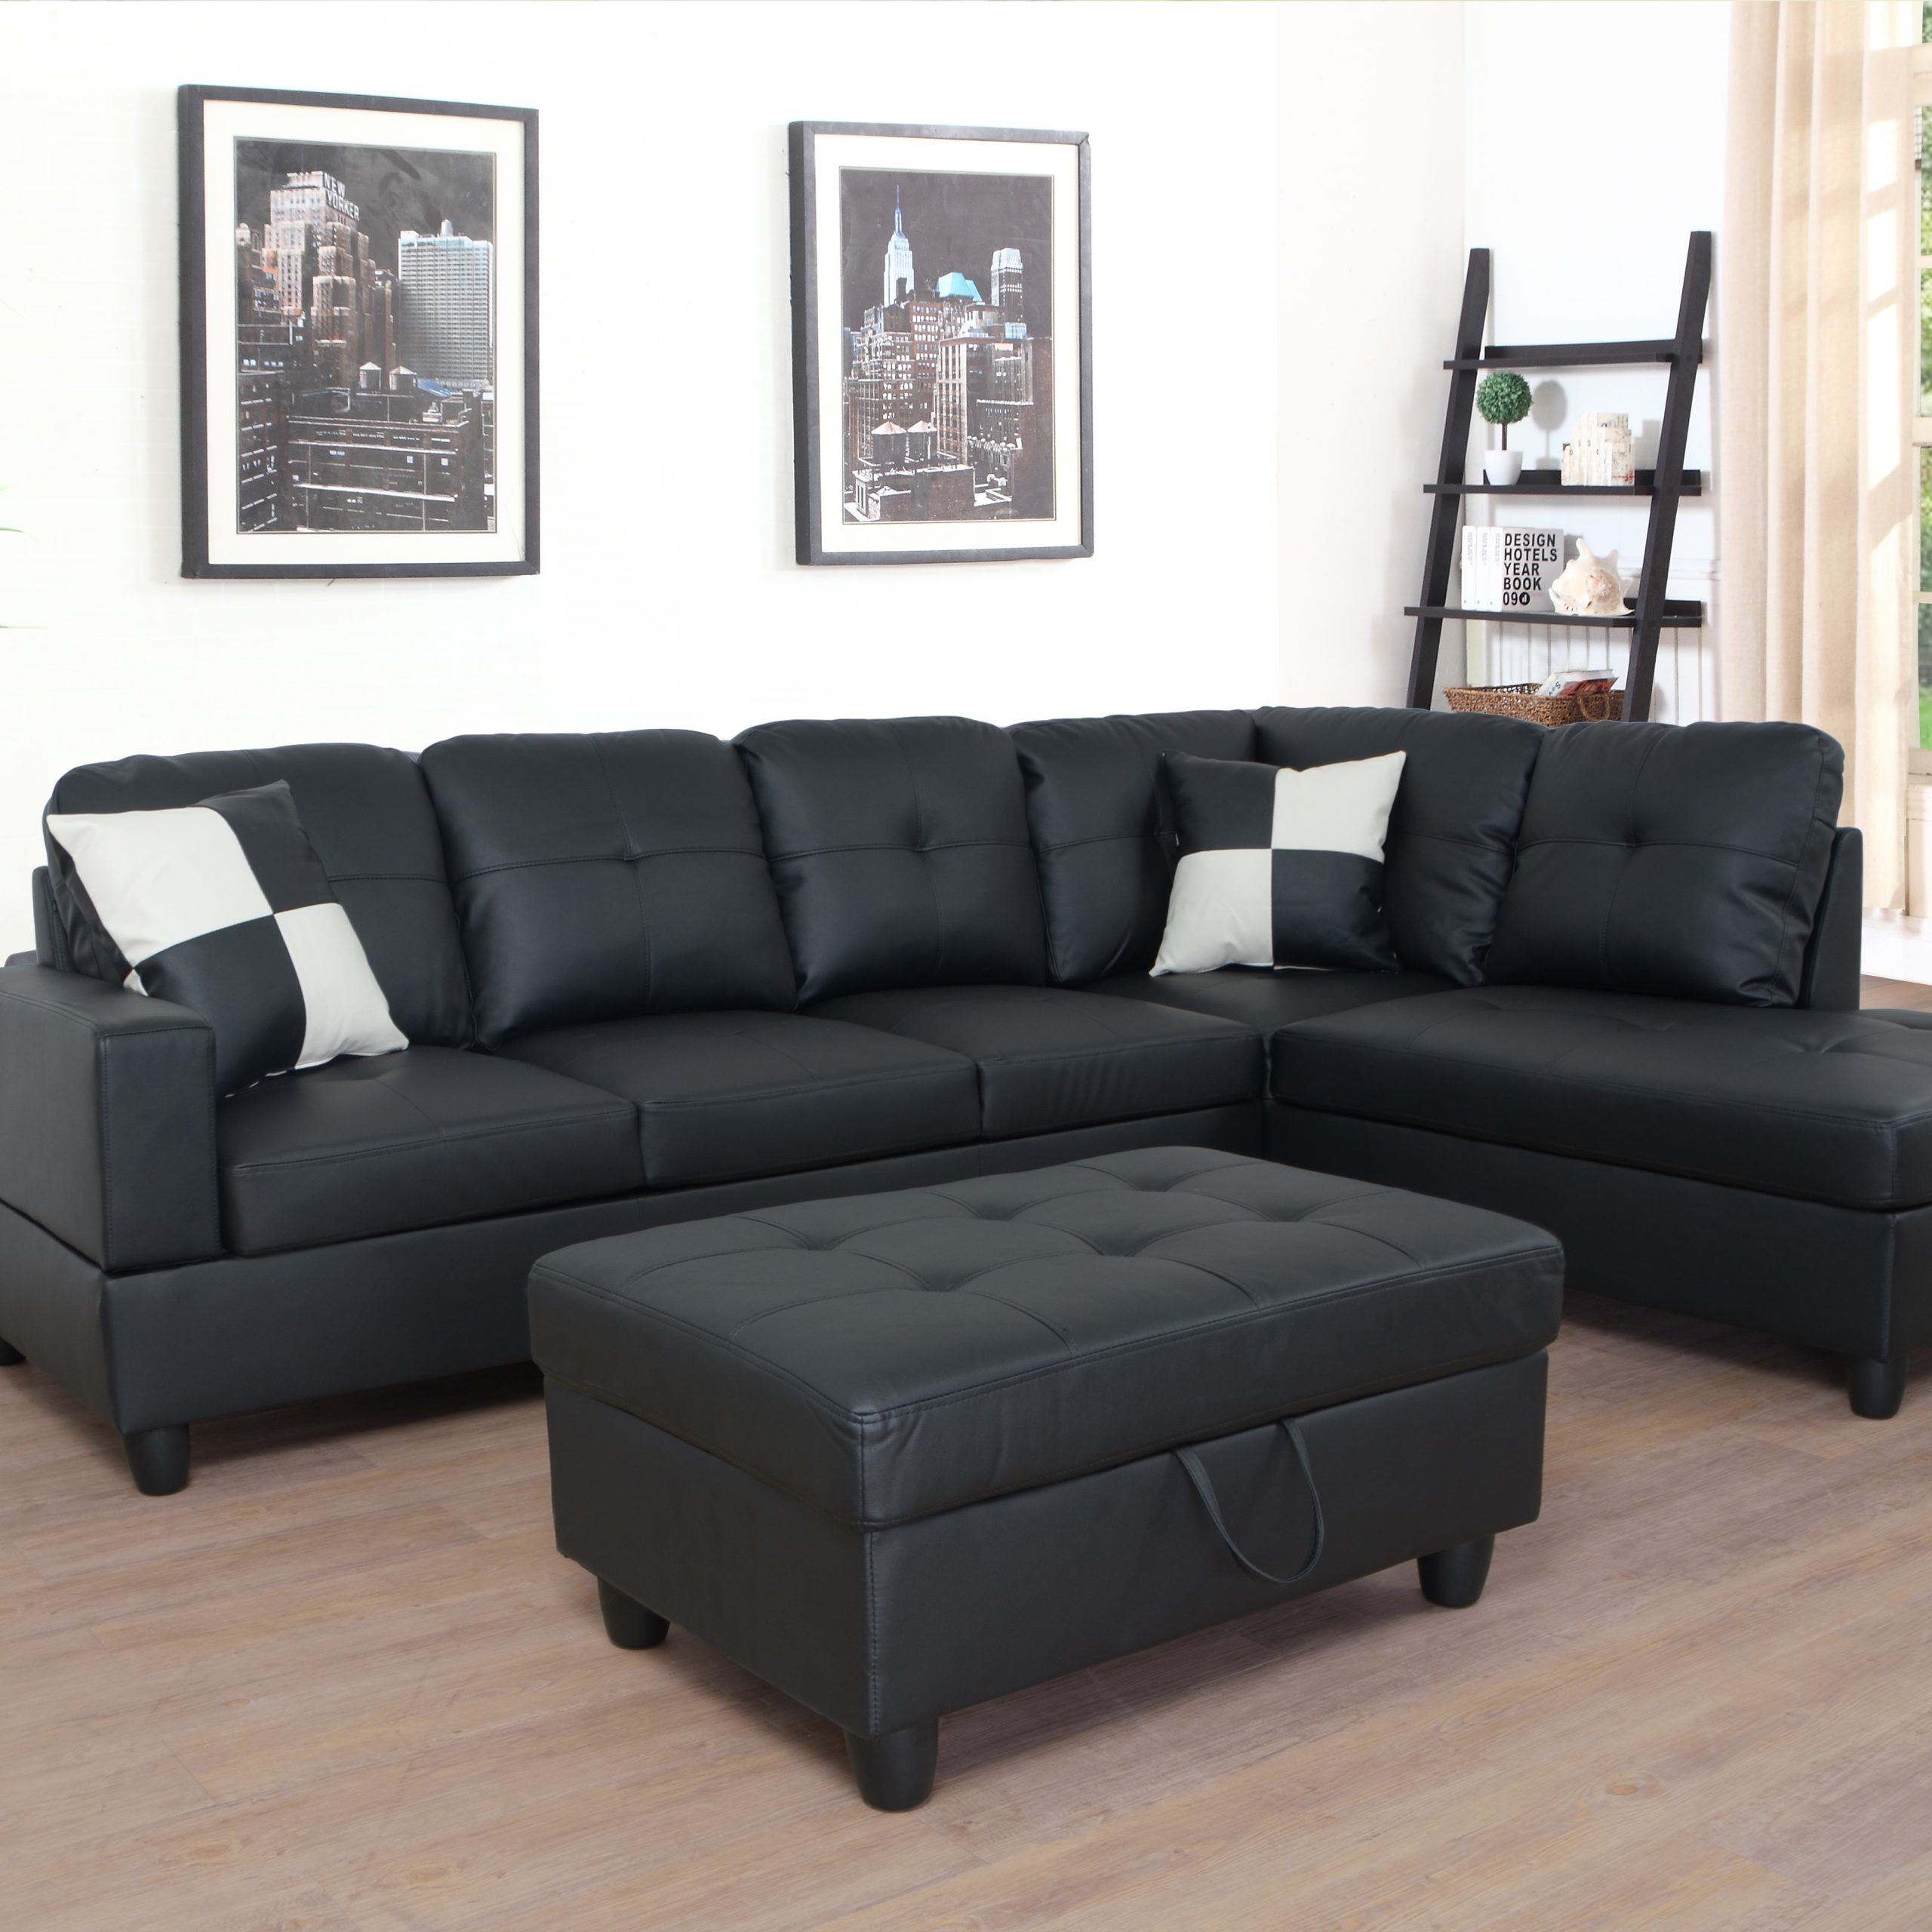 3 Pc Sectional Sofa Set, (black) Faux Leather Right  Facing Sofa With Free  Storage Ottoman Pertaining To Right Facing Black Sofas (View 10 of 15)